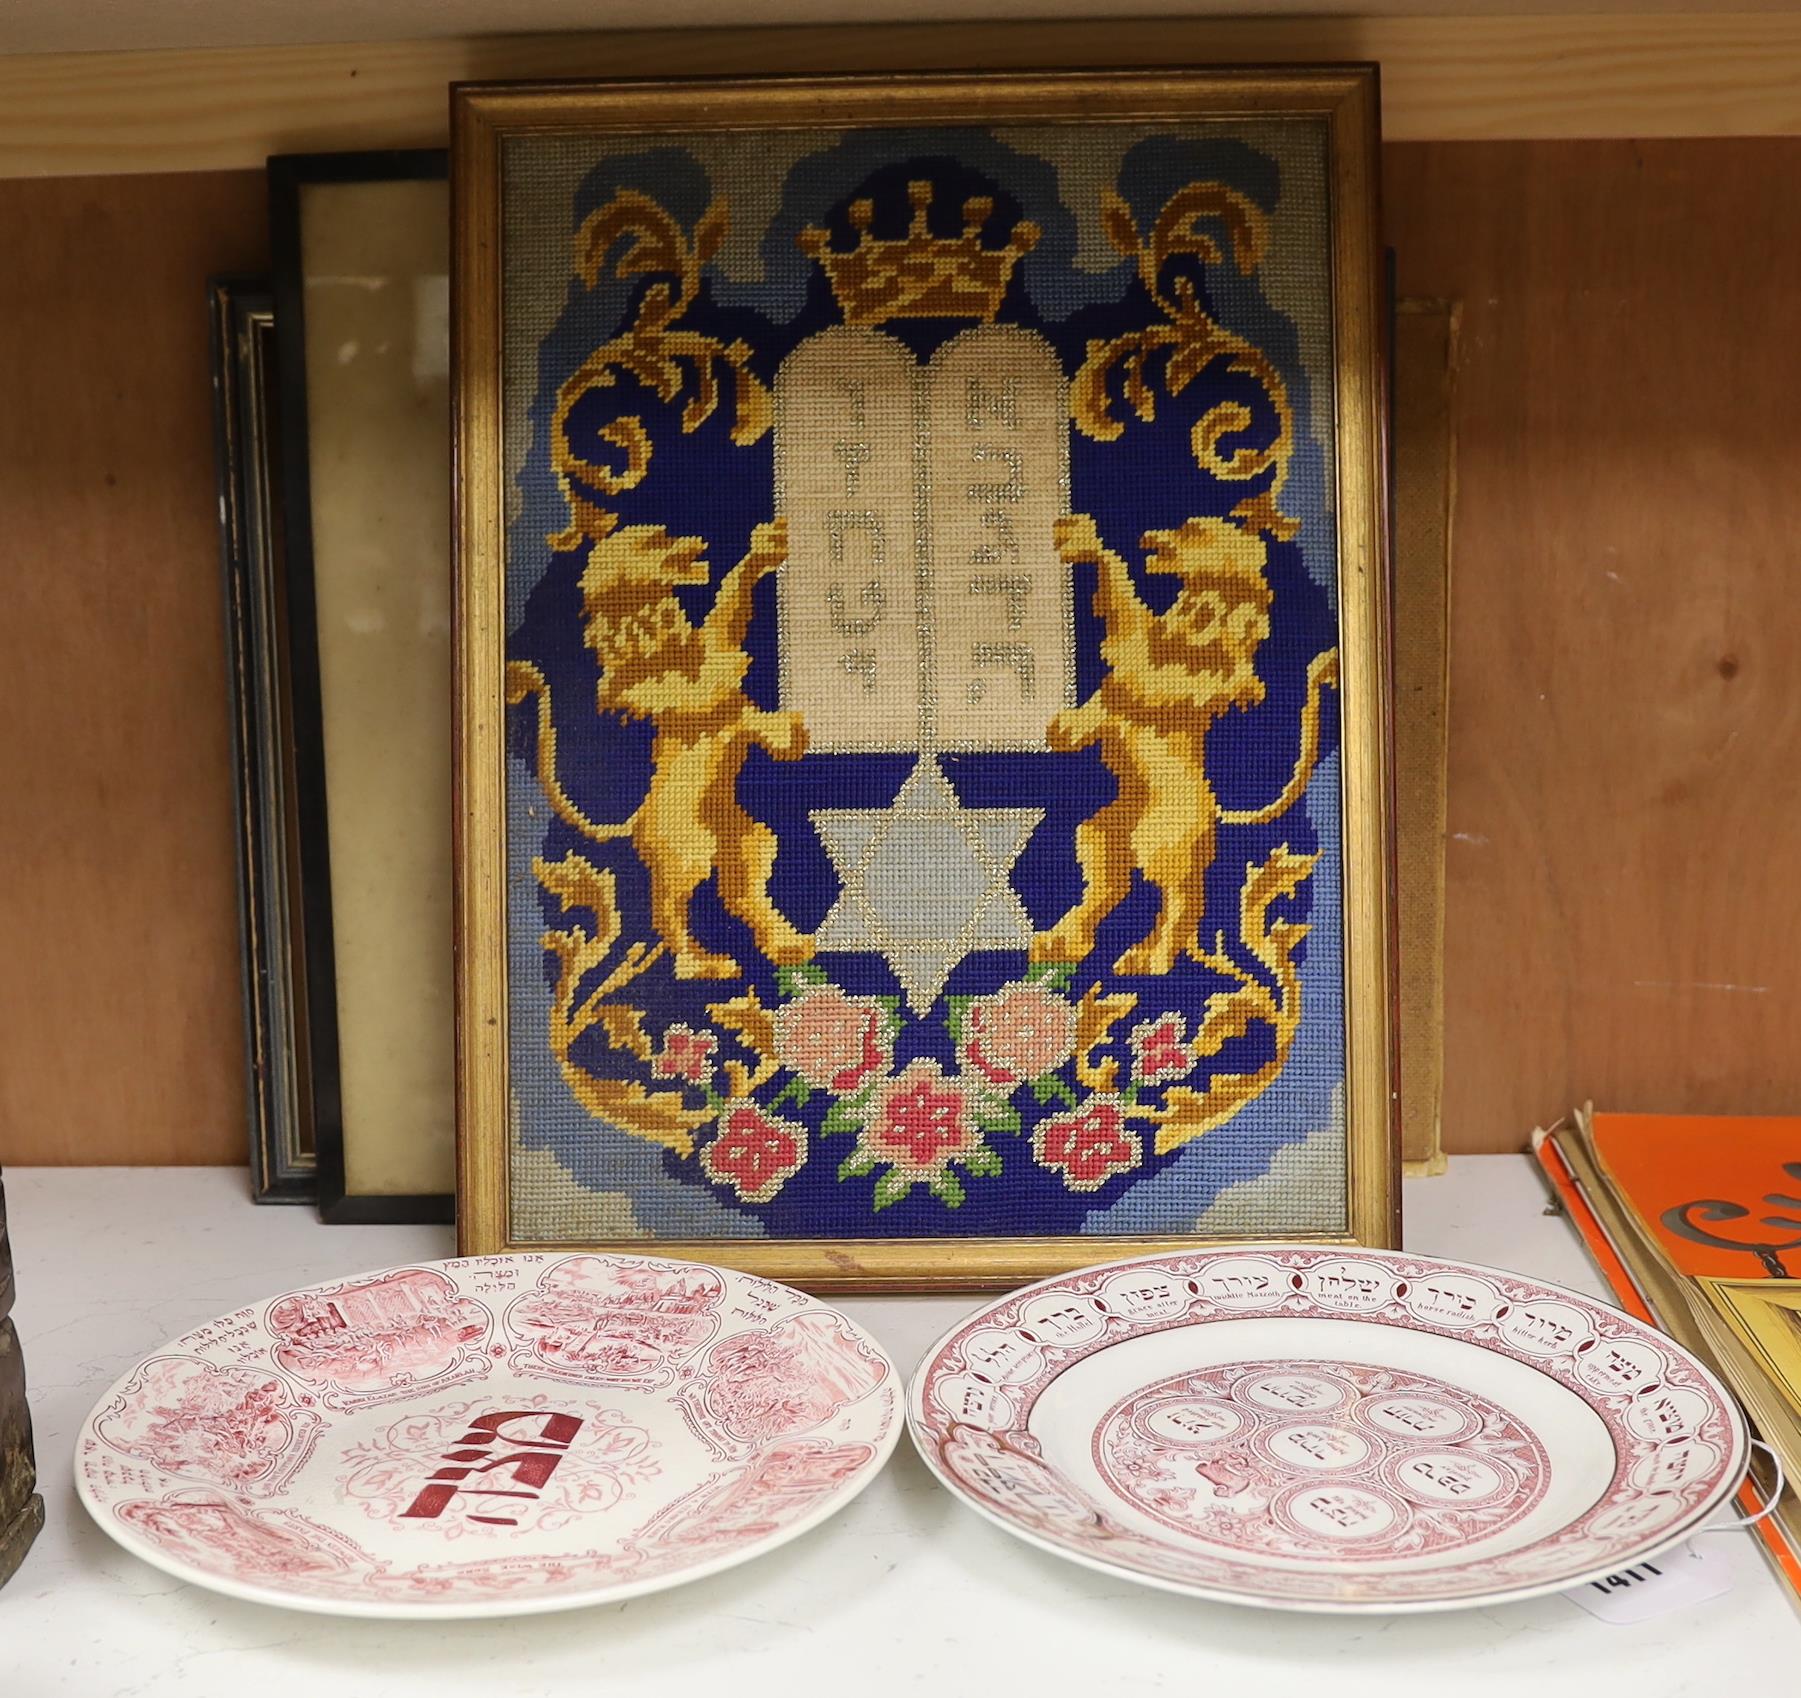 Judaica - two 1920's Ridgways pottery Passover plates, a needlepoint picture and two prints - Image 2 of 4